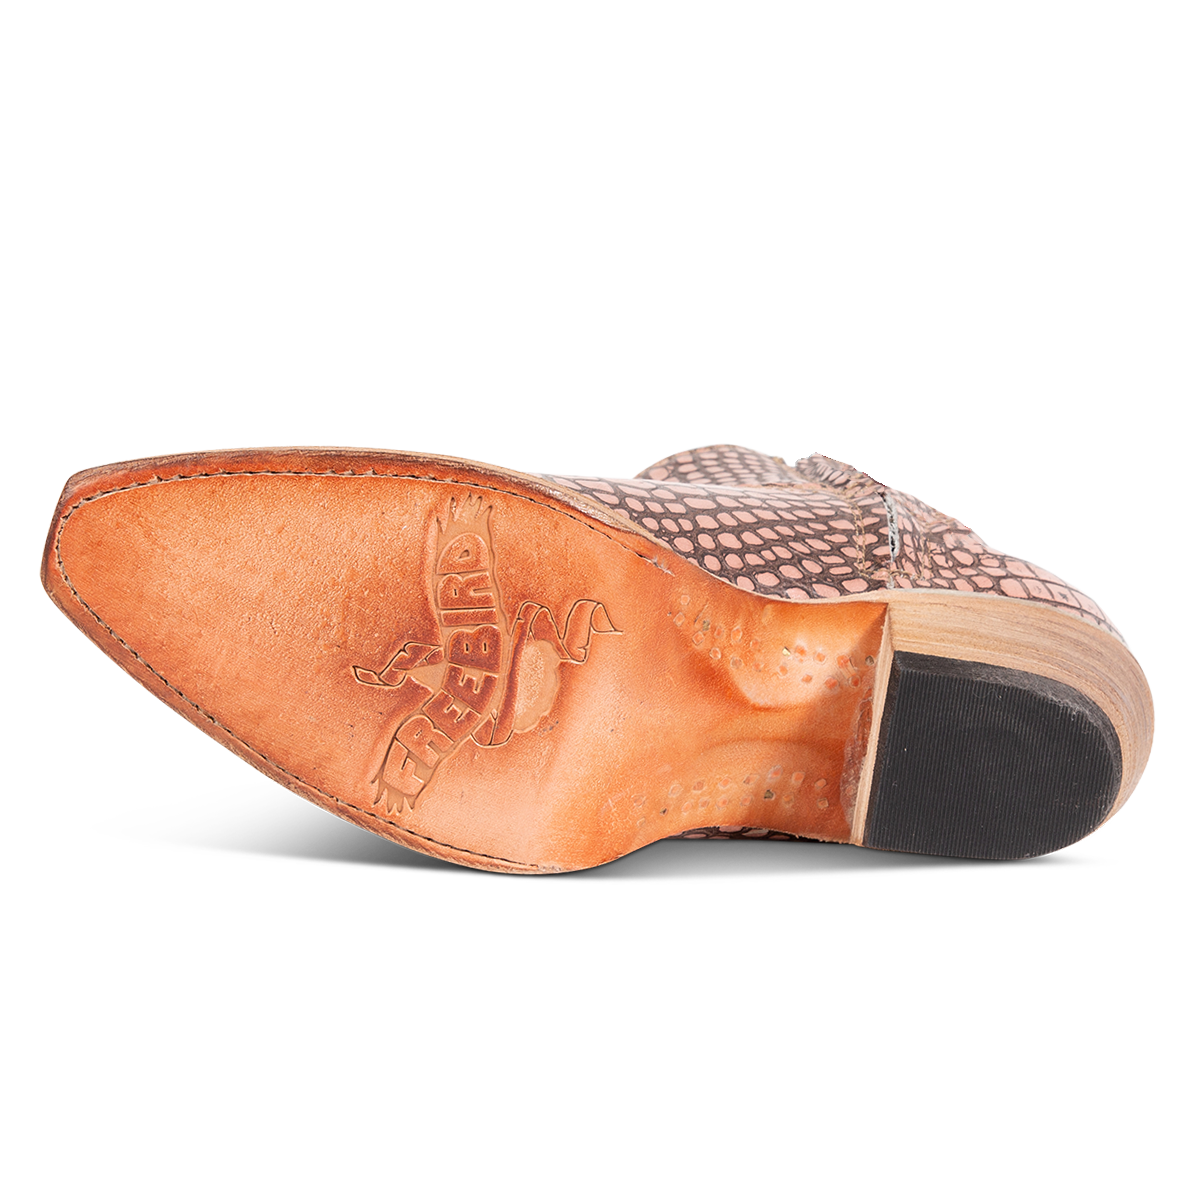 Black leather sole imprinted with FREEBIRD on women's Miramar blush croco ankle bootie